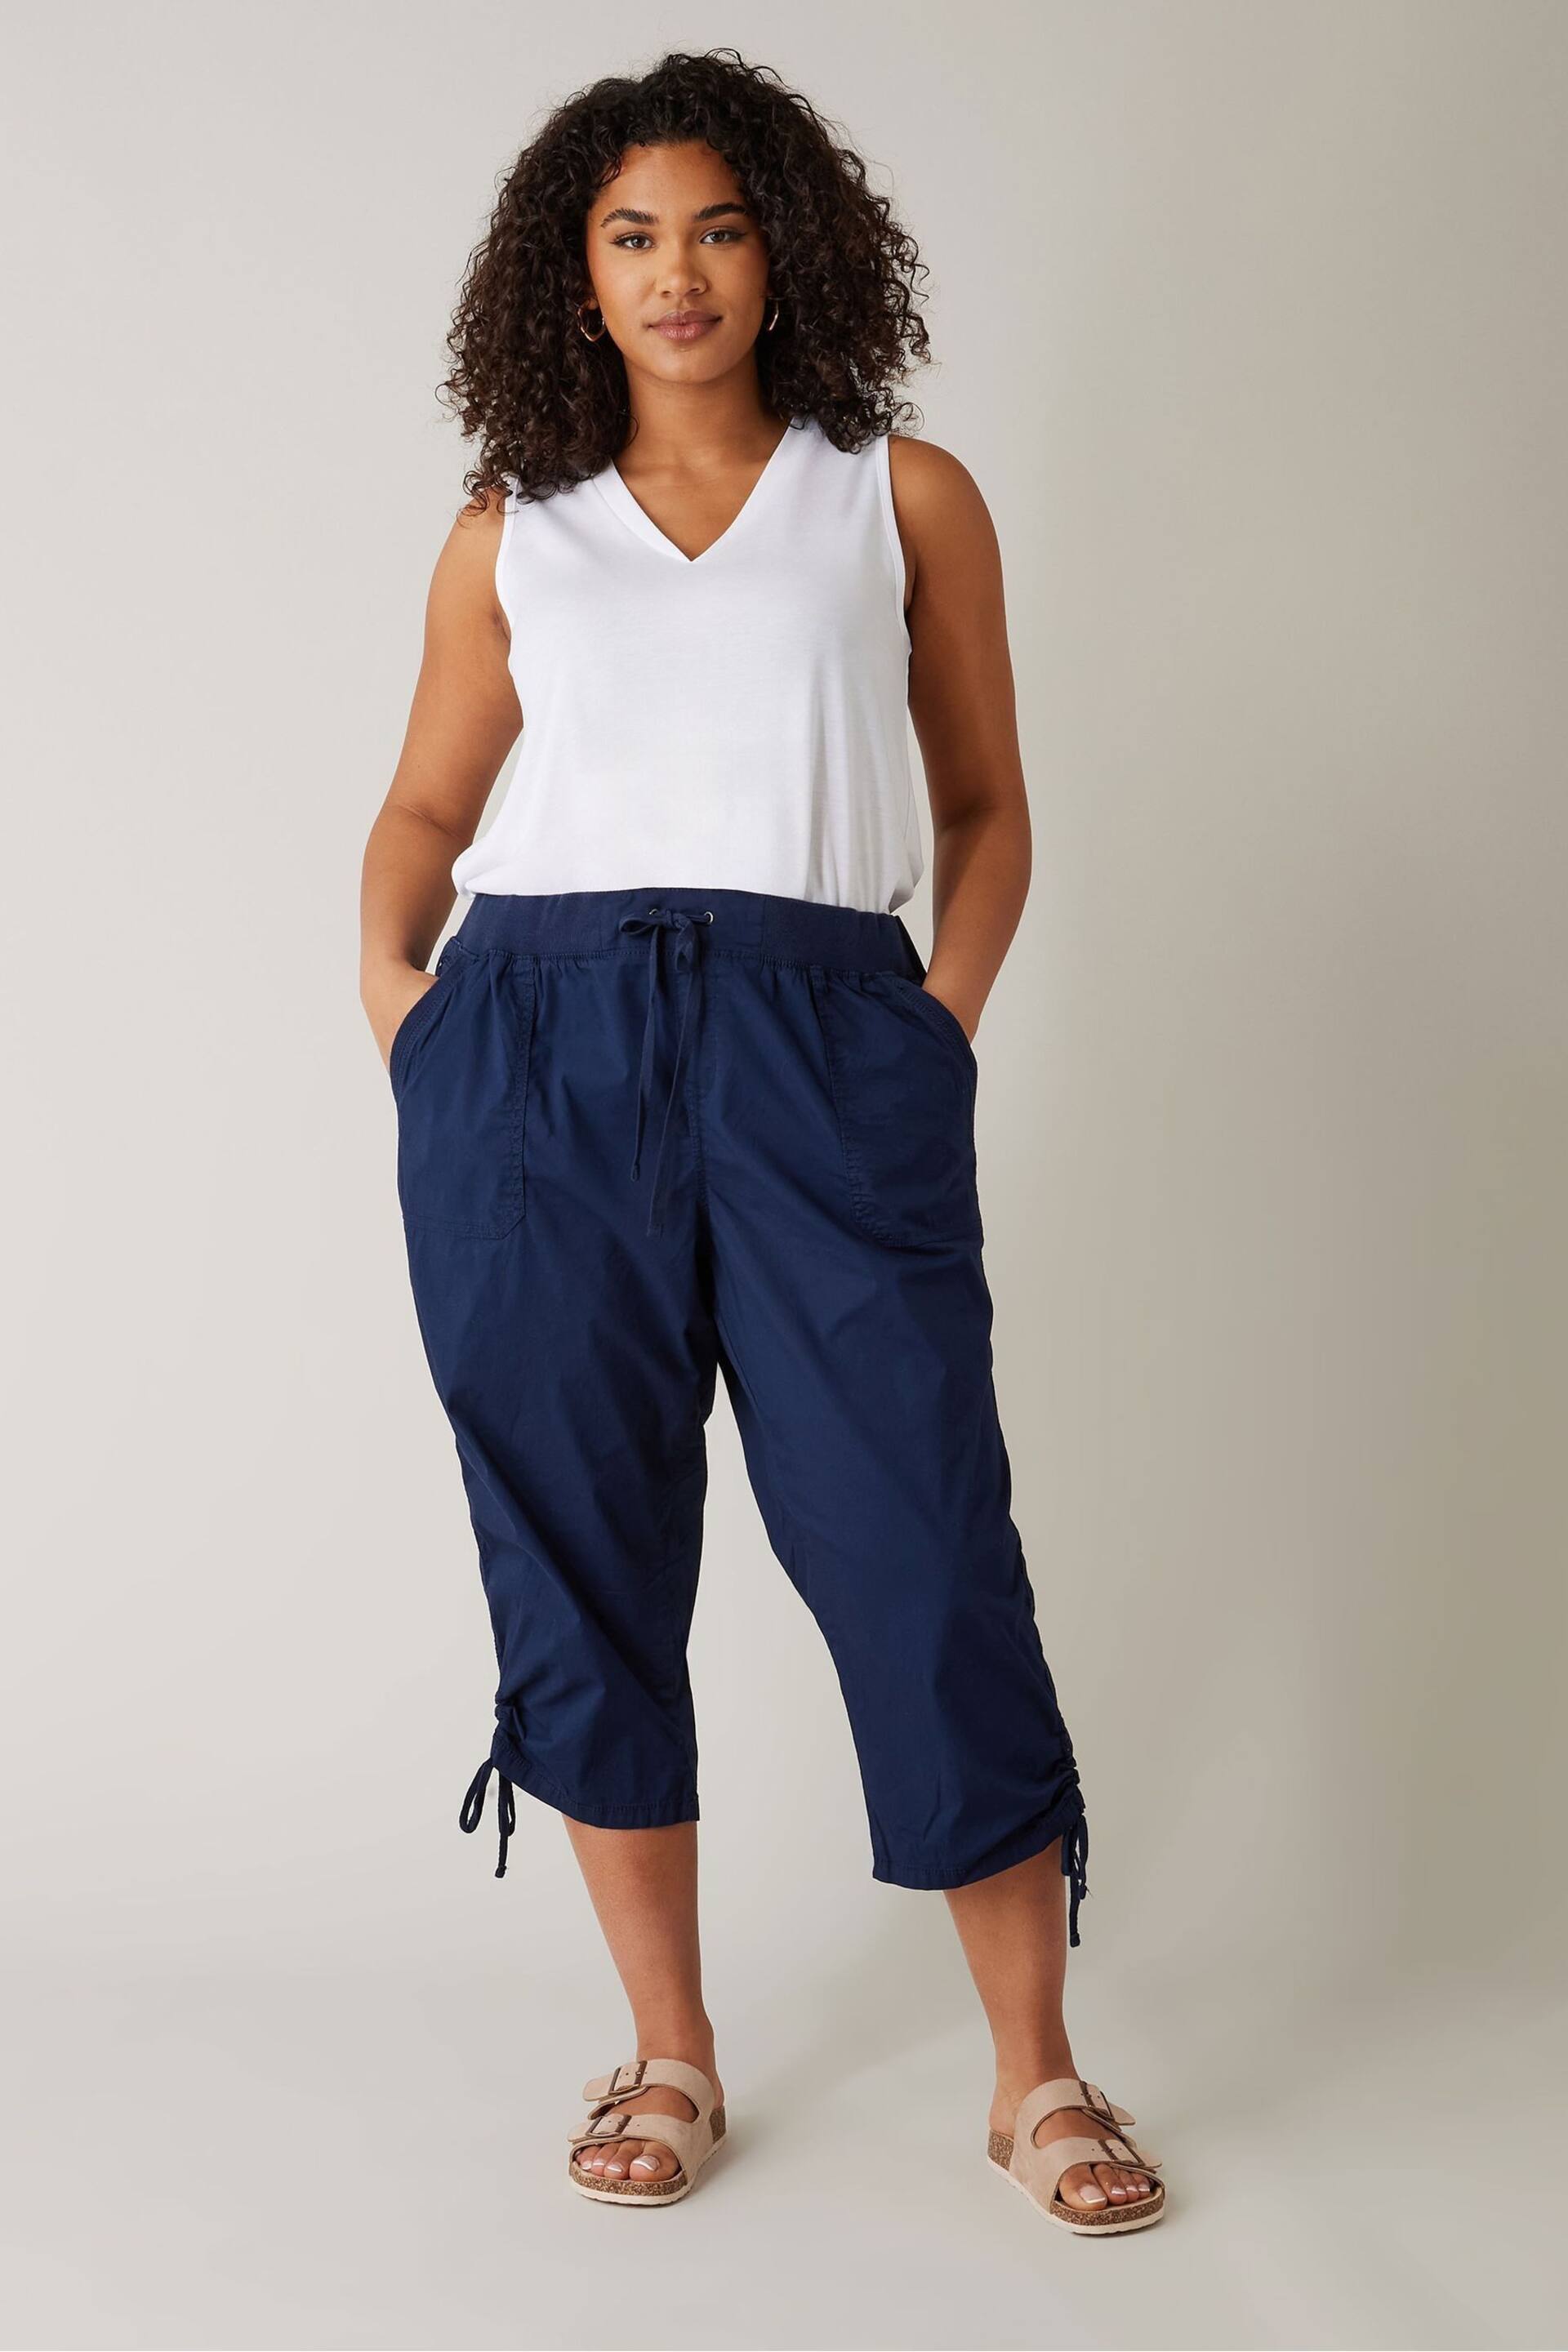 Evans Navy Blue Elasticated Waist Cropped Trousers - Image 2 of 2